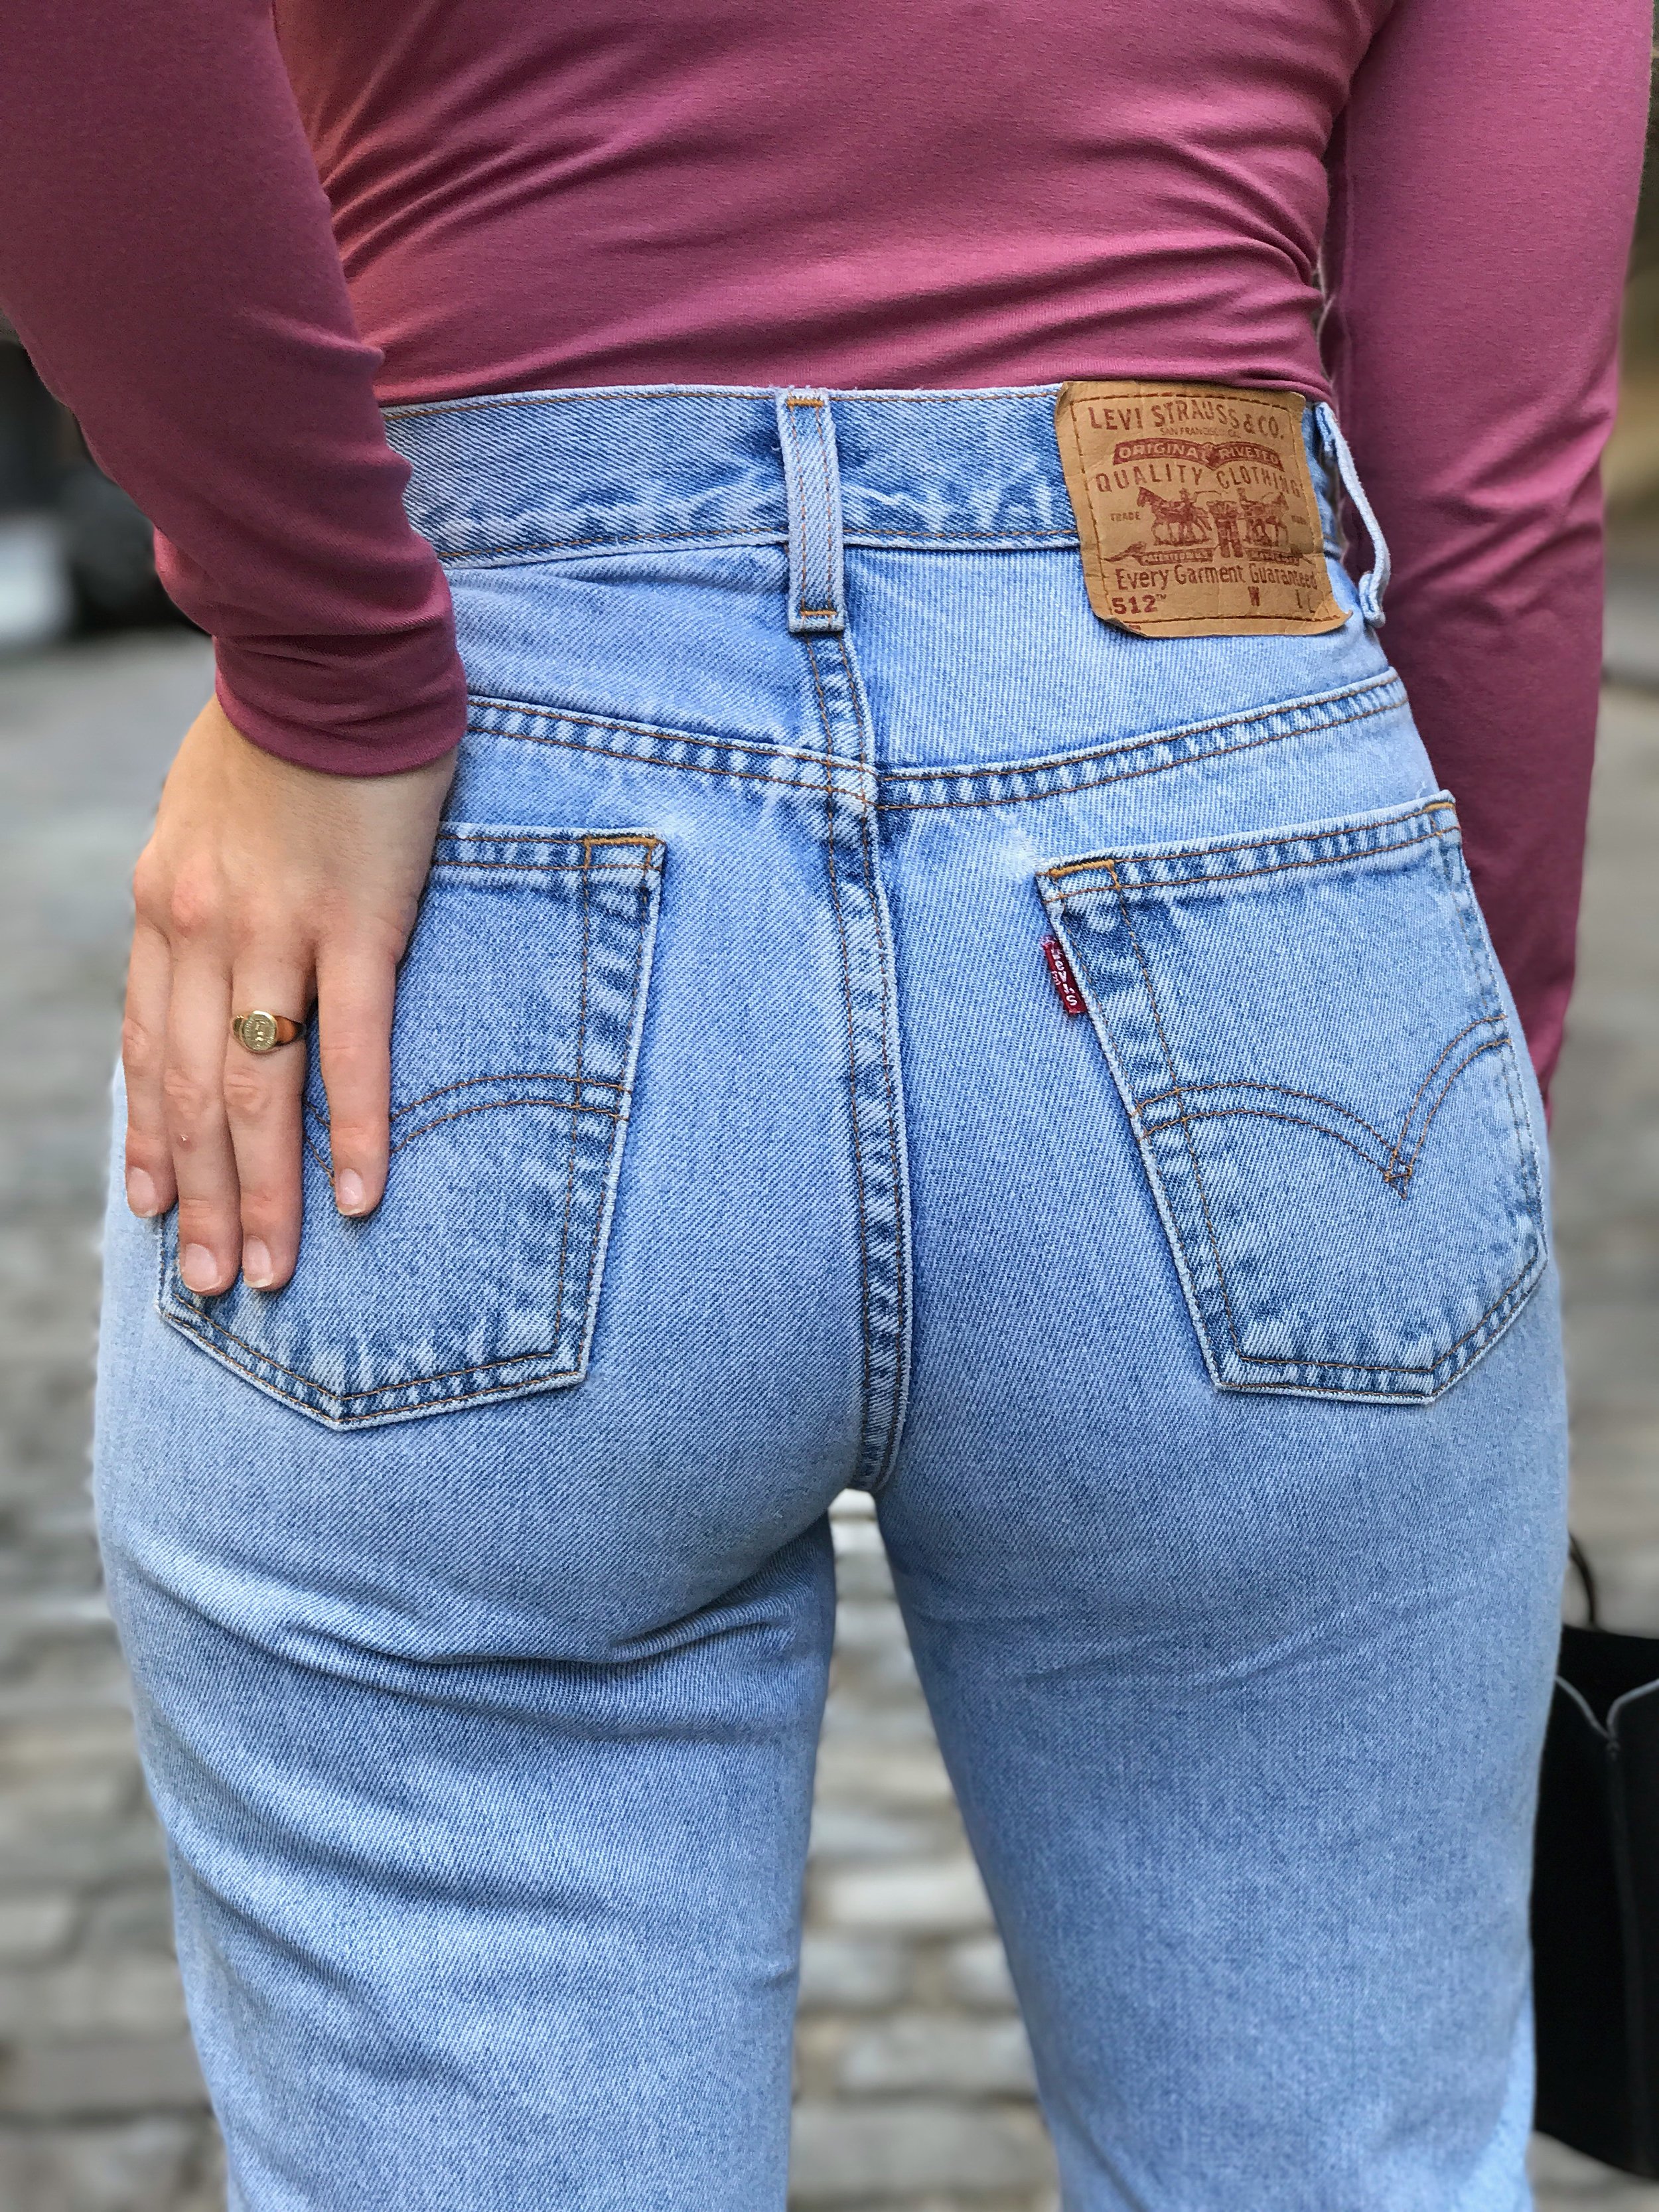 HOW TO FOR VINTAGE JEANS YOU'RE PETITE CURVY — The Pear Project